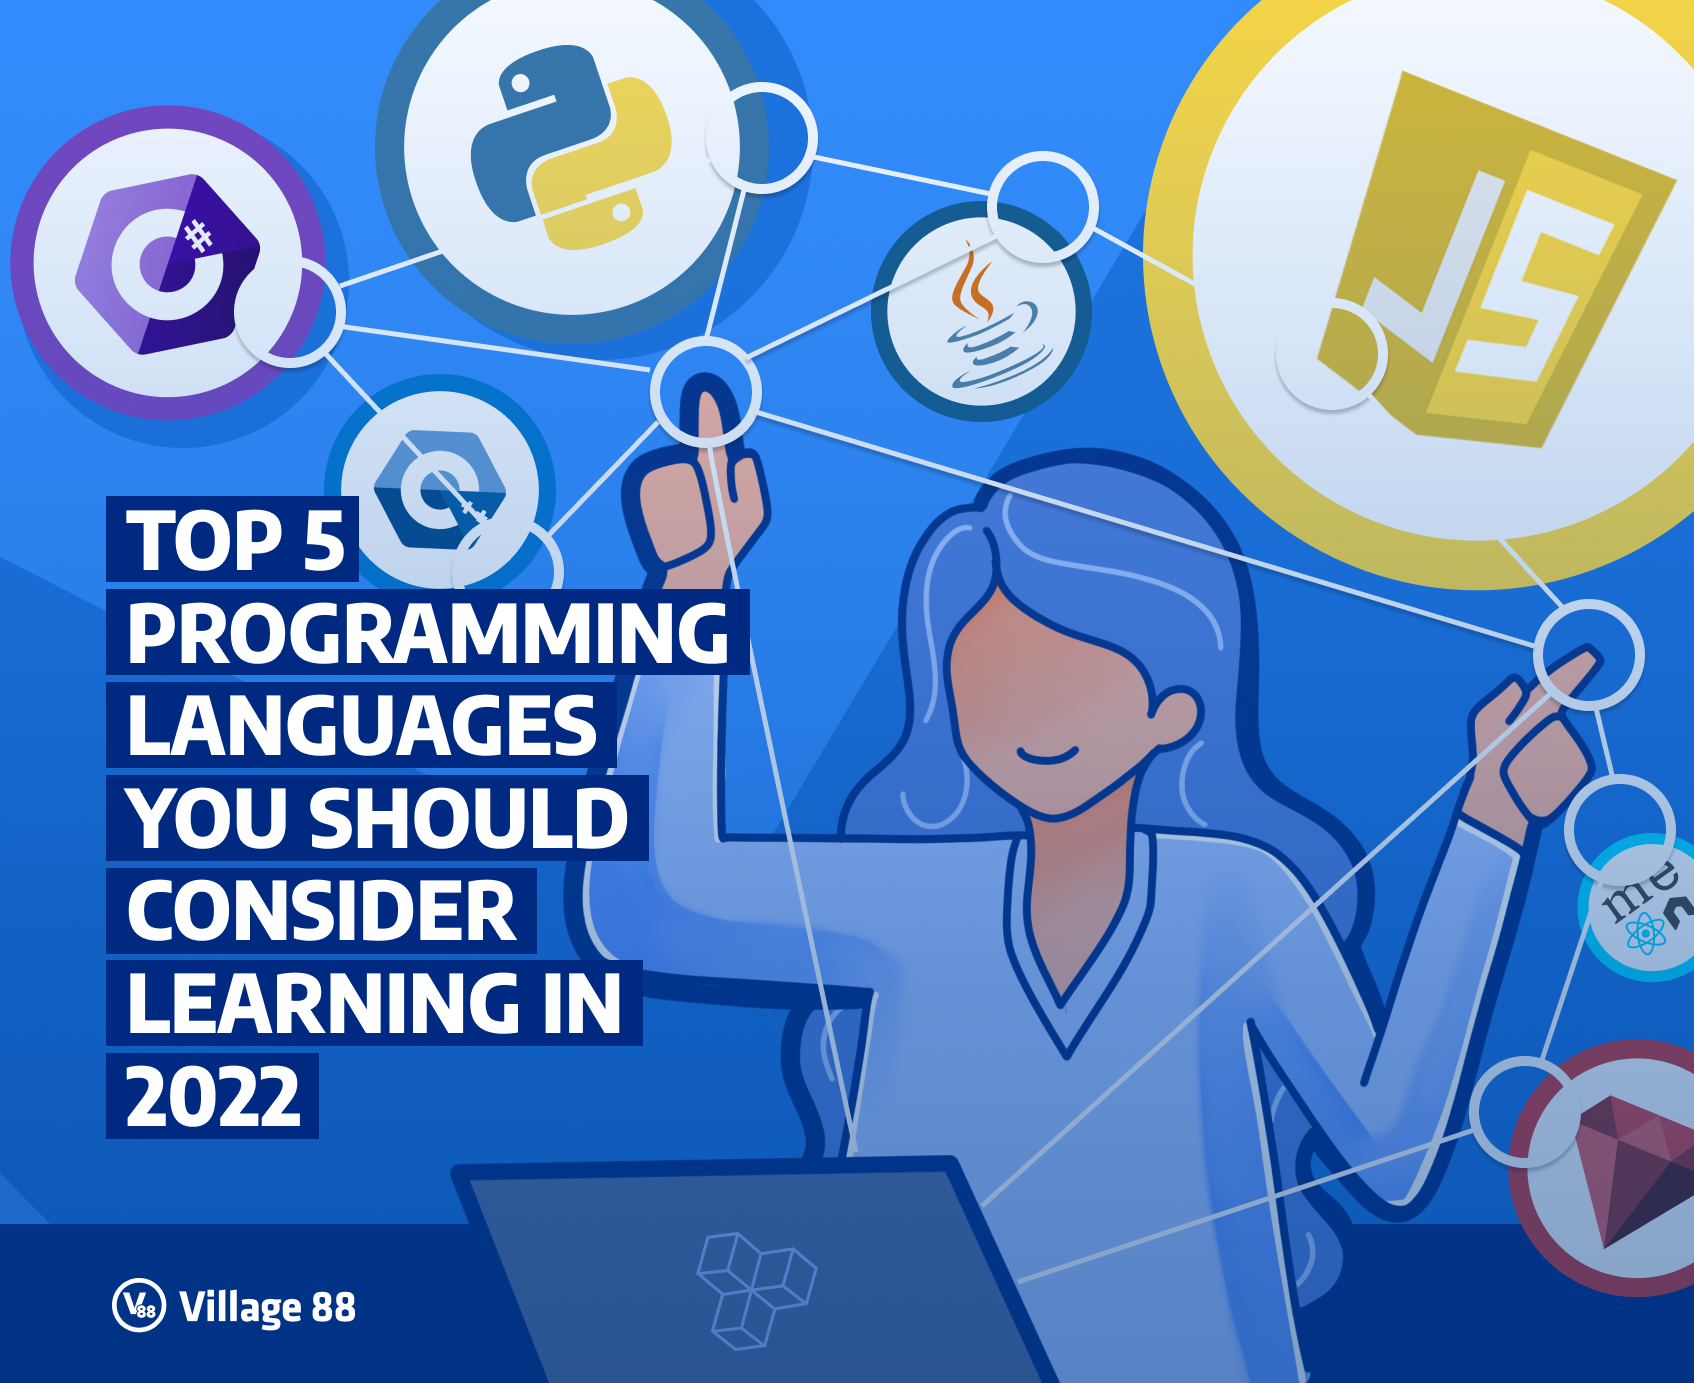 Top 5 Programming Languages You Should Consider Learning in 2022